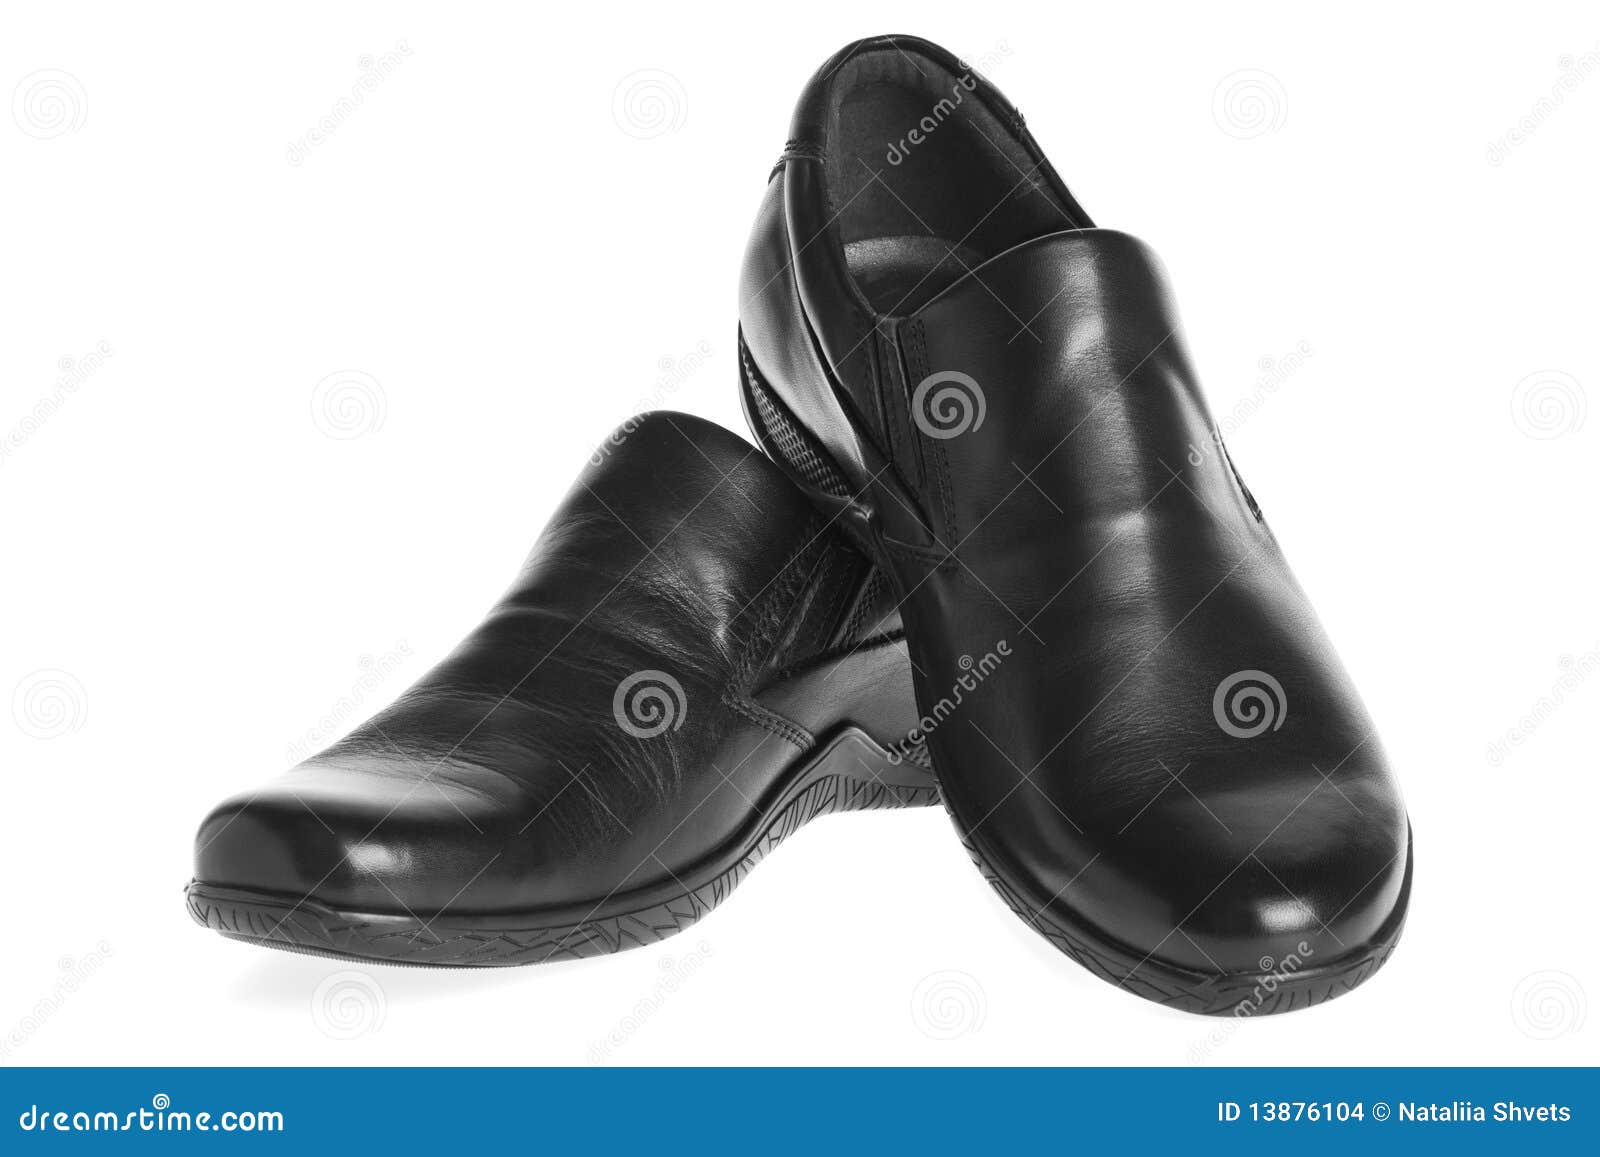 Leather men shoes stock photo. Image of foot, shoe, design - 13876104